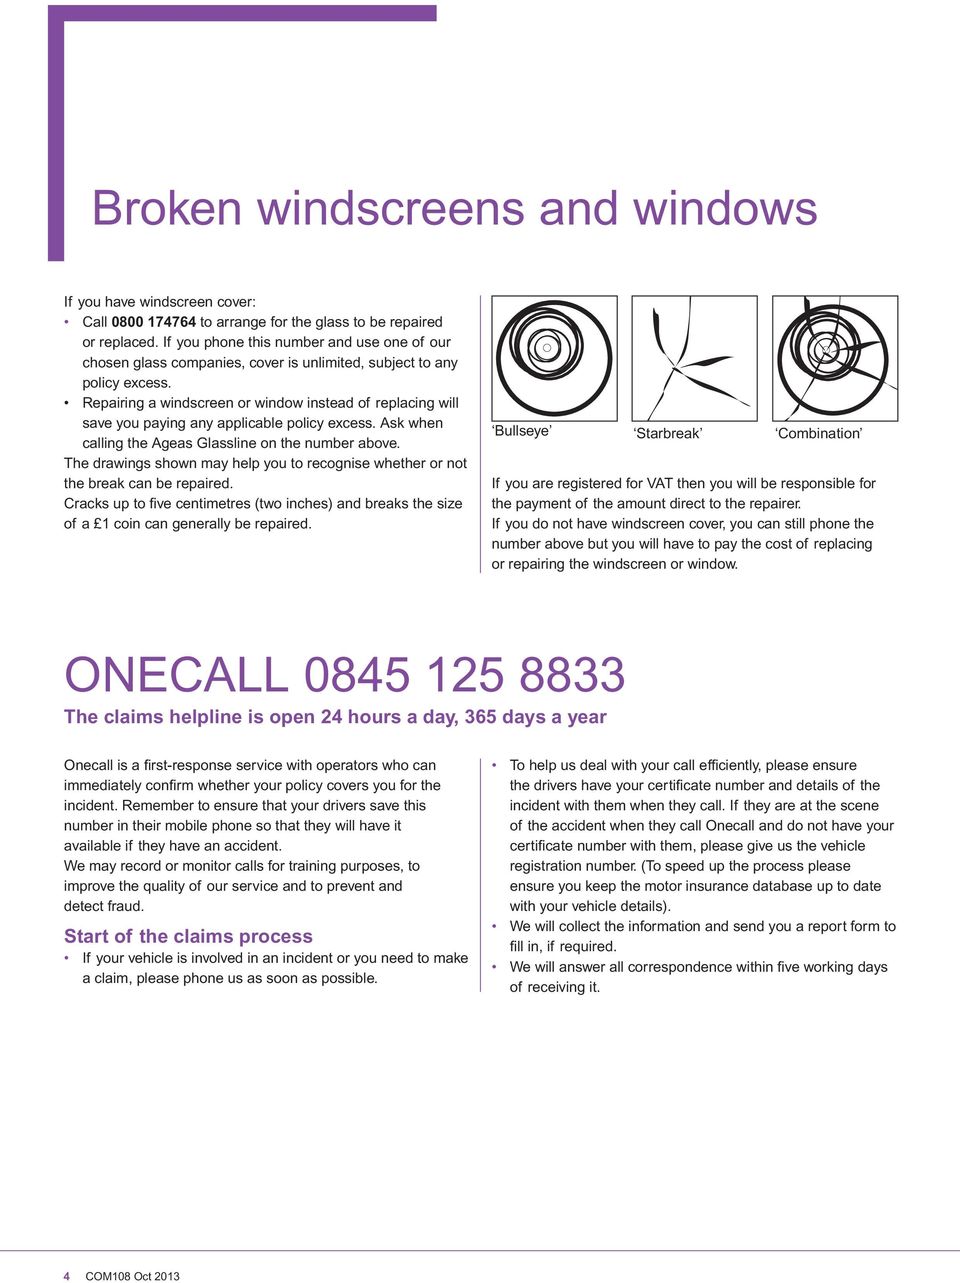 Repairing a windscreen or window instead of replacing will save you paying any applicable policy excess. Ask when calling the Ageas Glassline on the number above.